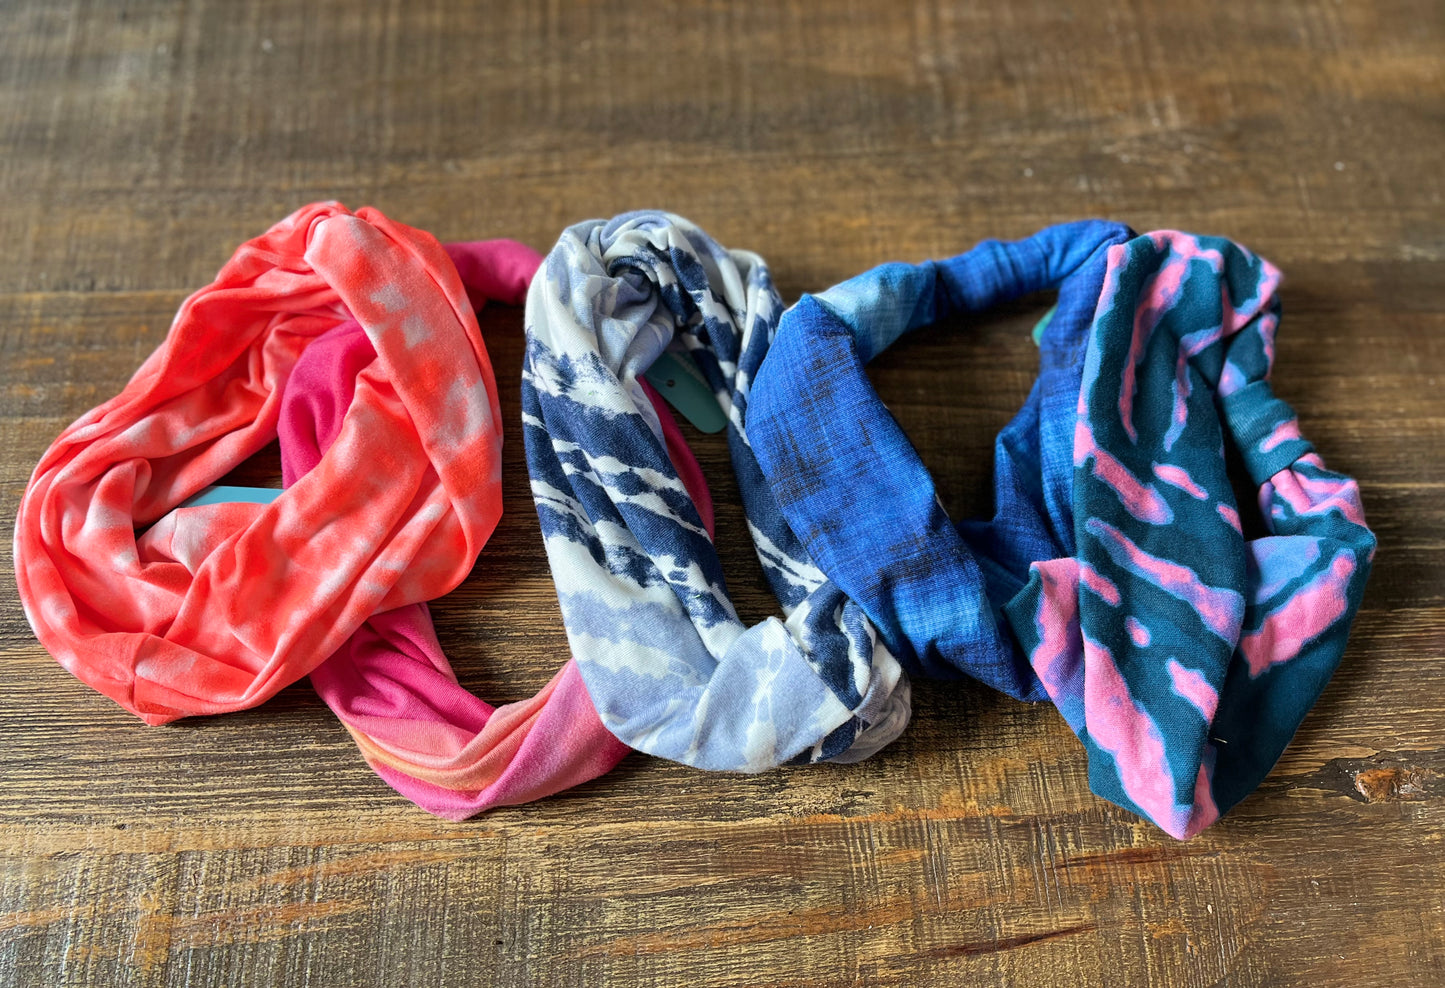 Handcrafted Headbands produced by Papillon Enterprises in Haiti. Accesorize your look with these headbands that come in colorful or muted tones.